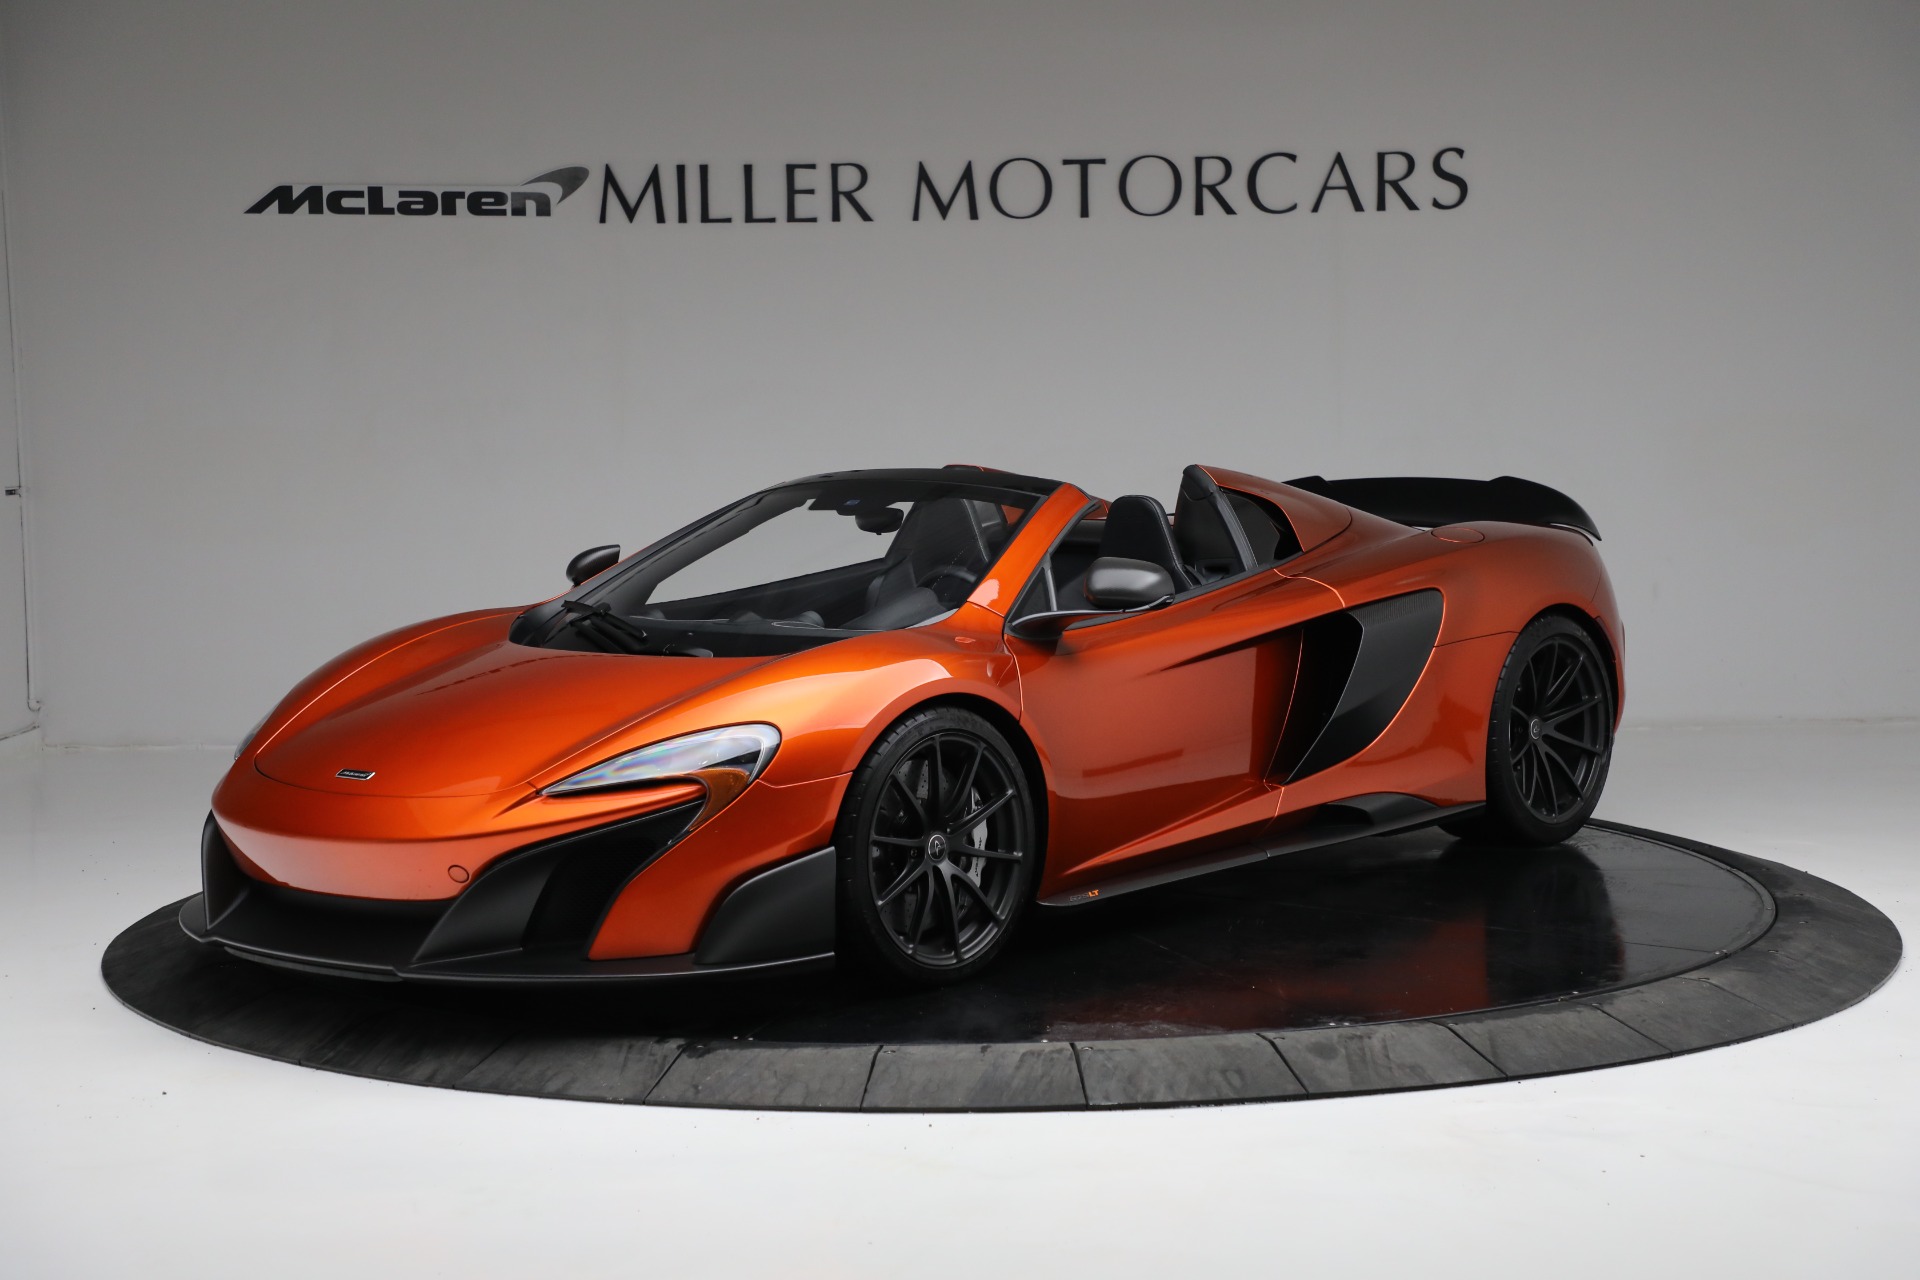 Used 2016 McLaren 675LT Spider for sale $275,900 at Maserati of Greenwich in Greenwich CT 06830 1